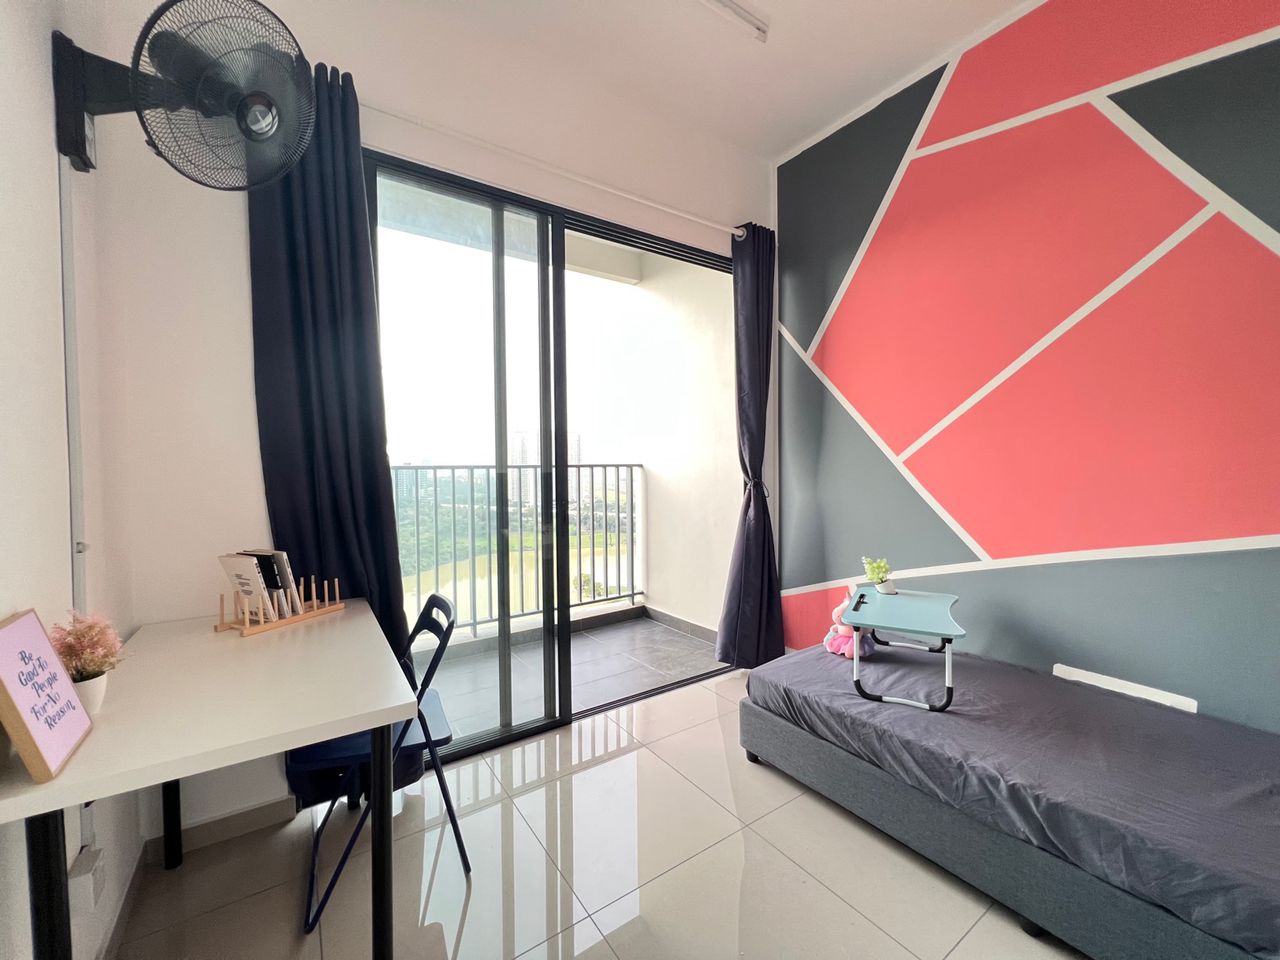 FREE High Speed Wifi Room for rent in Sri Petaling/Bukit Jalil.